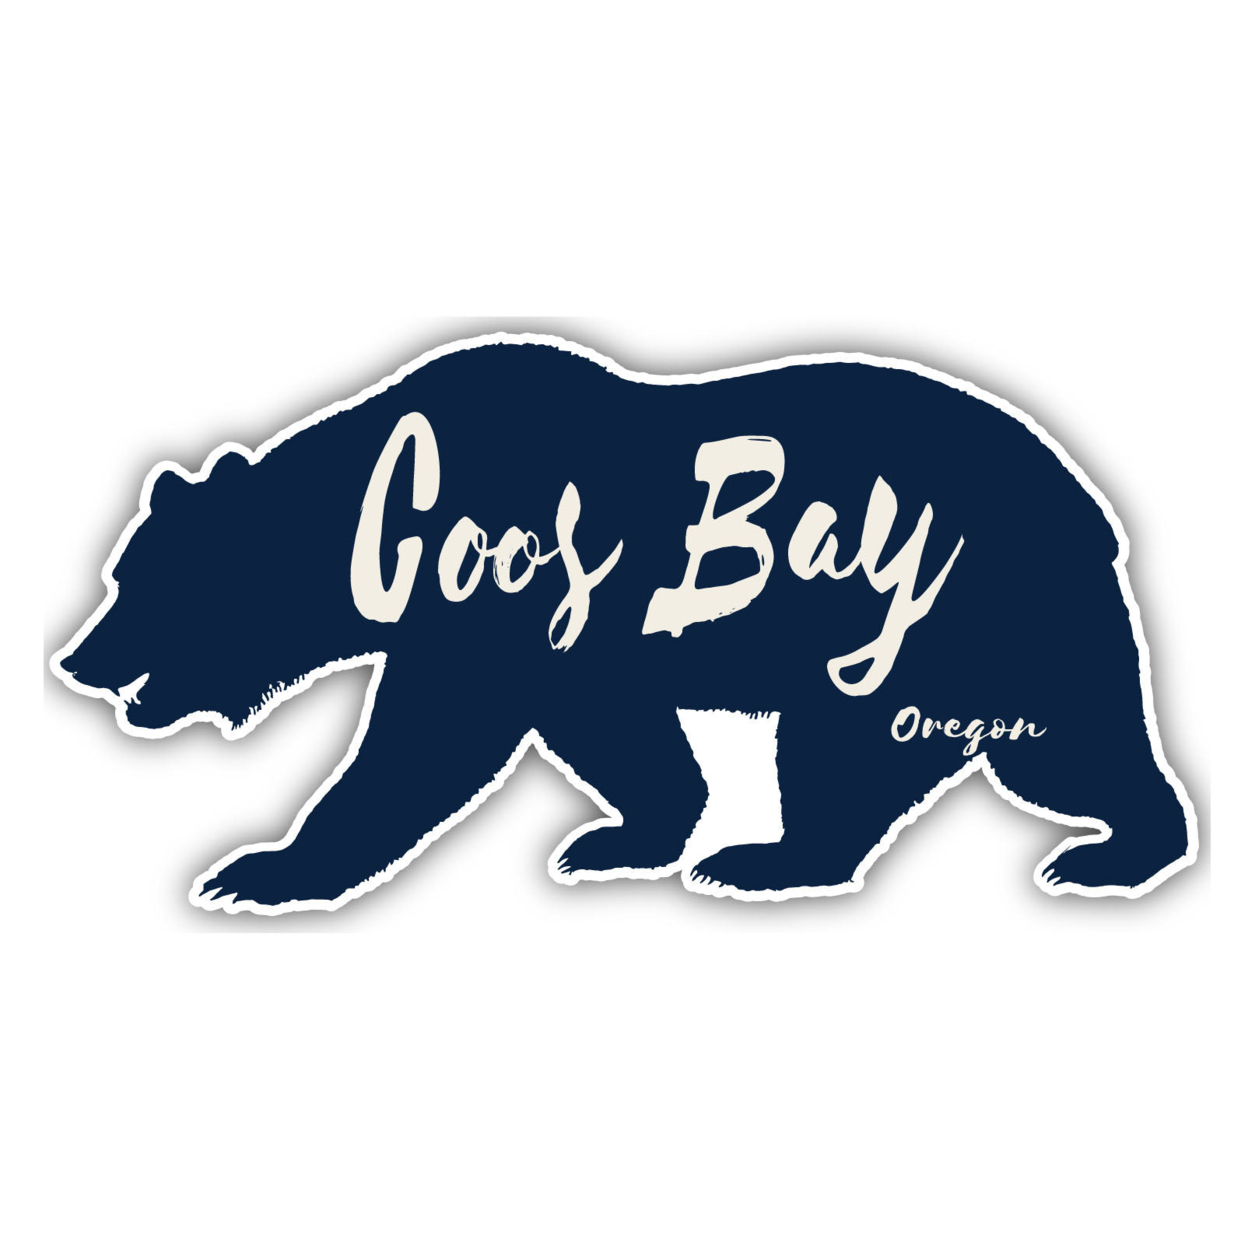 Coos Bay Oregon Souvenir Decorative Stickers (Choose Theme And Size) - 4-Pack, 4-Inch, Bear